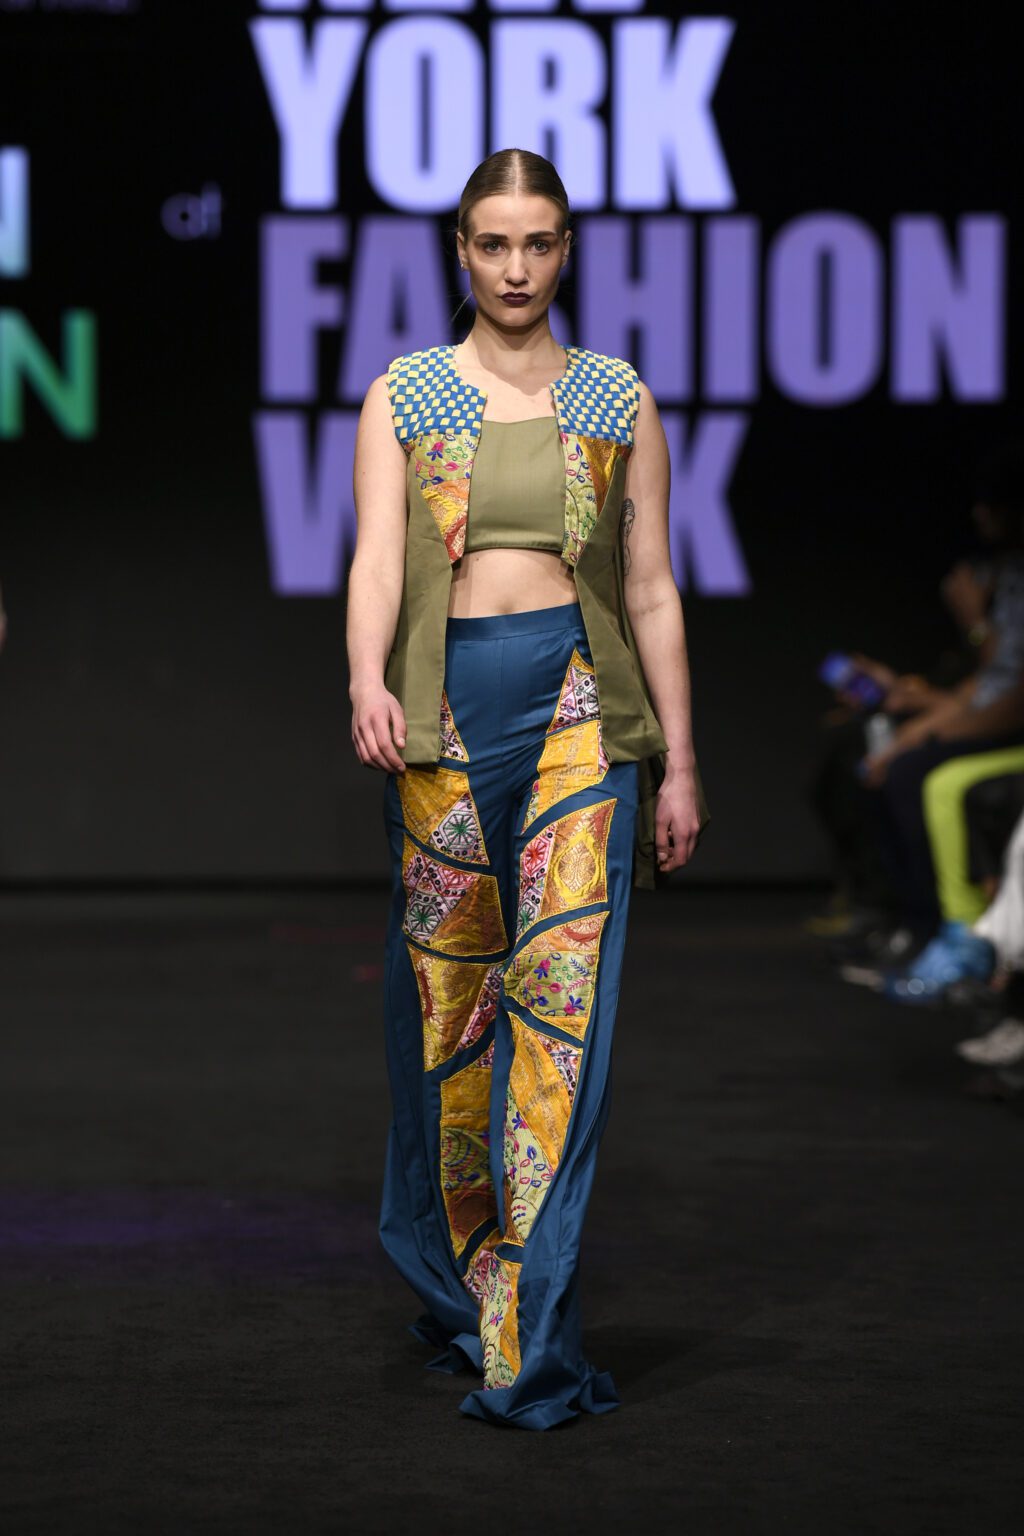 NEW YORK, NEW YORK - FEBRUARY 12: Lisa Reimer walks the runway wearing INIFD-LST India Fashion Trunk - At New York Fashion Week Powered By Art Hearts Fashion at The Ziegfeld Ballroom on February 12, 2022 in New York City. (Photo by Arun Nevader/Getty Images for Art Hearts Fashion)